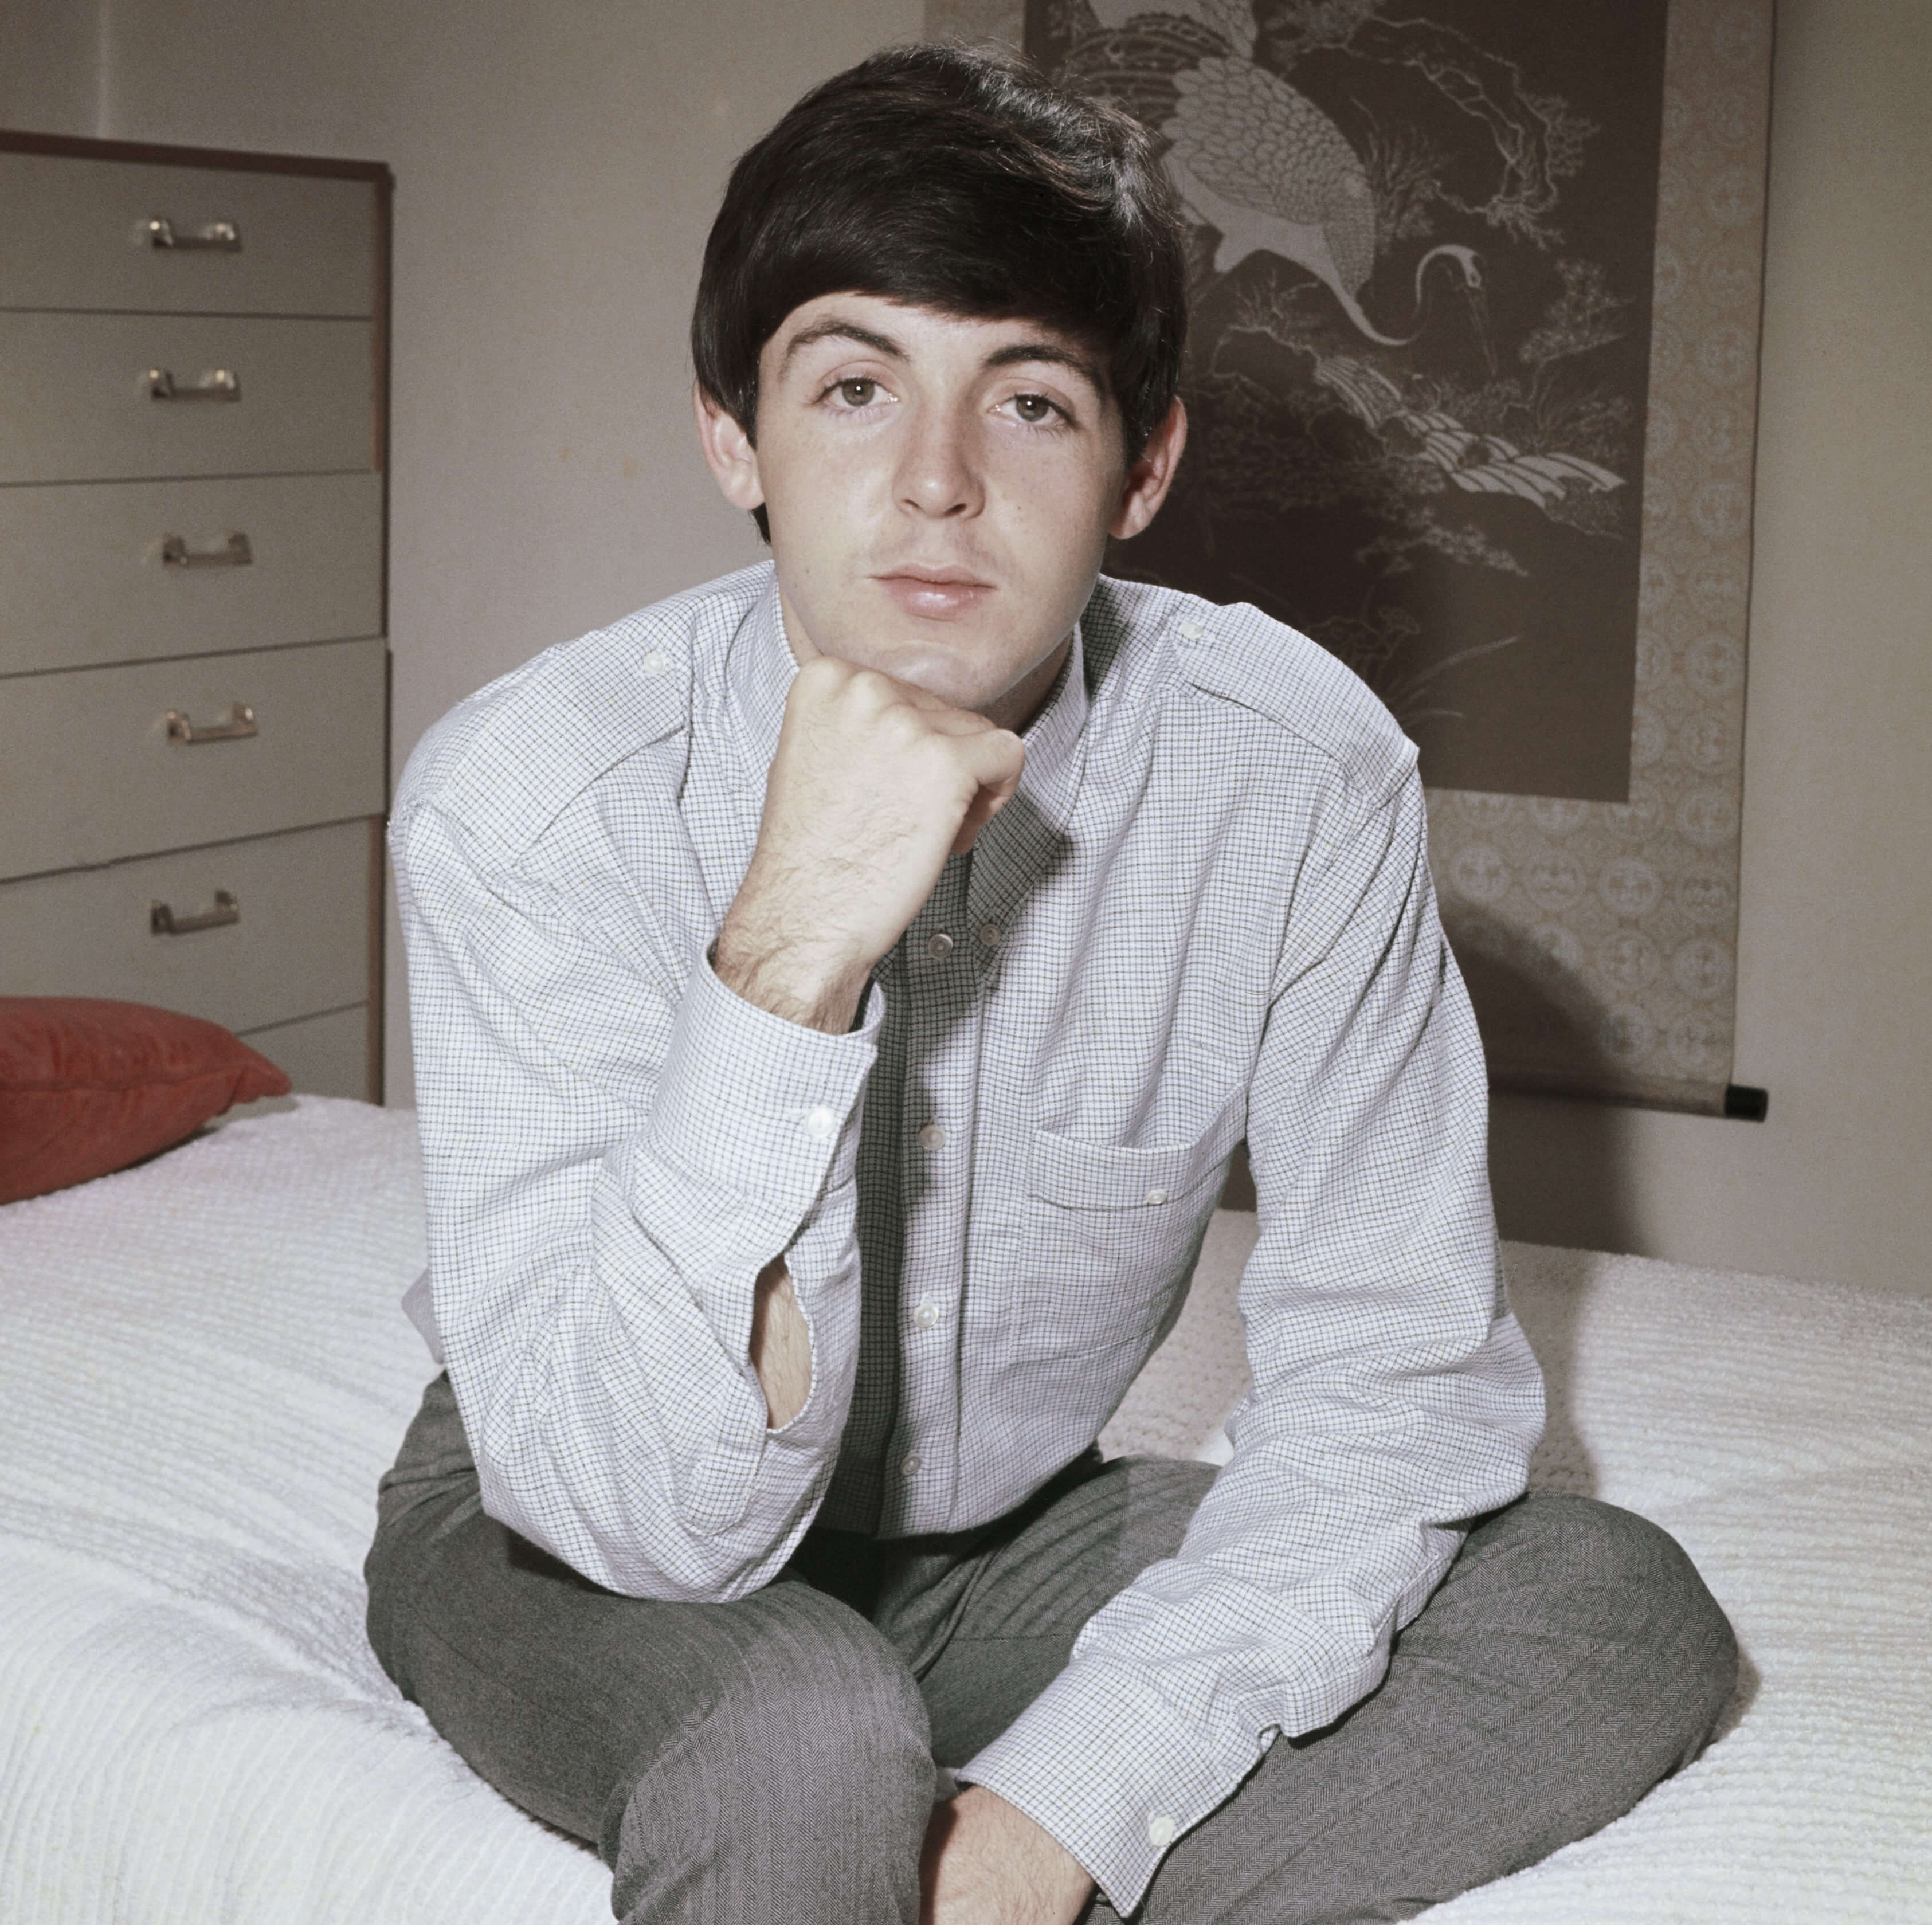 Paul McCartney on his bed during The Beatles' "Can't Buy Me Love" era